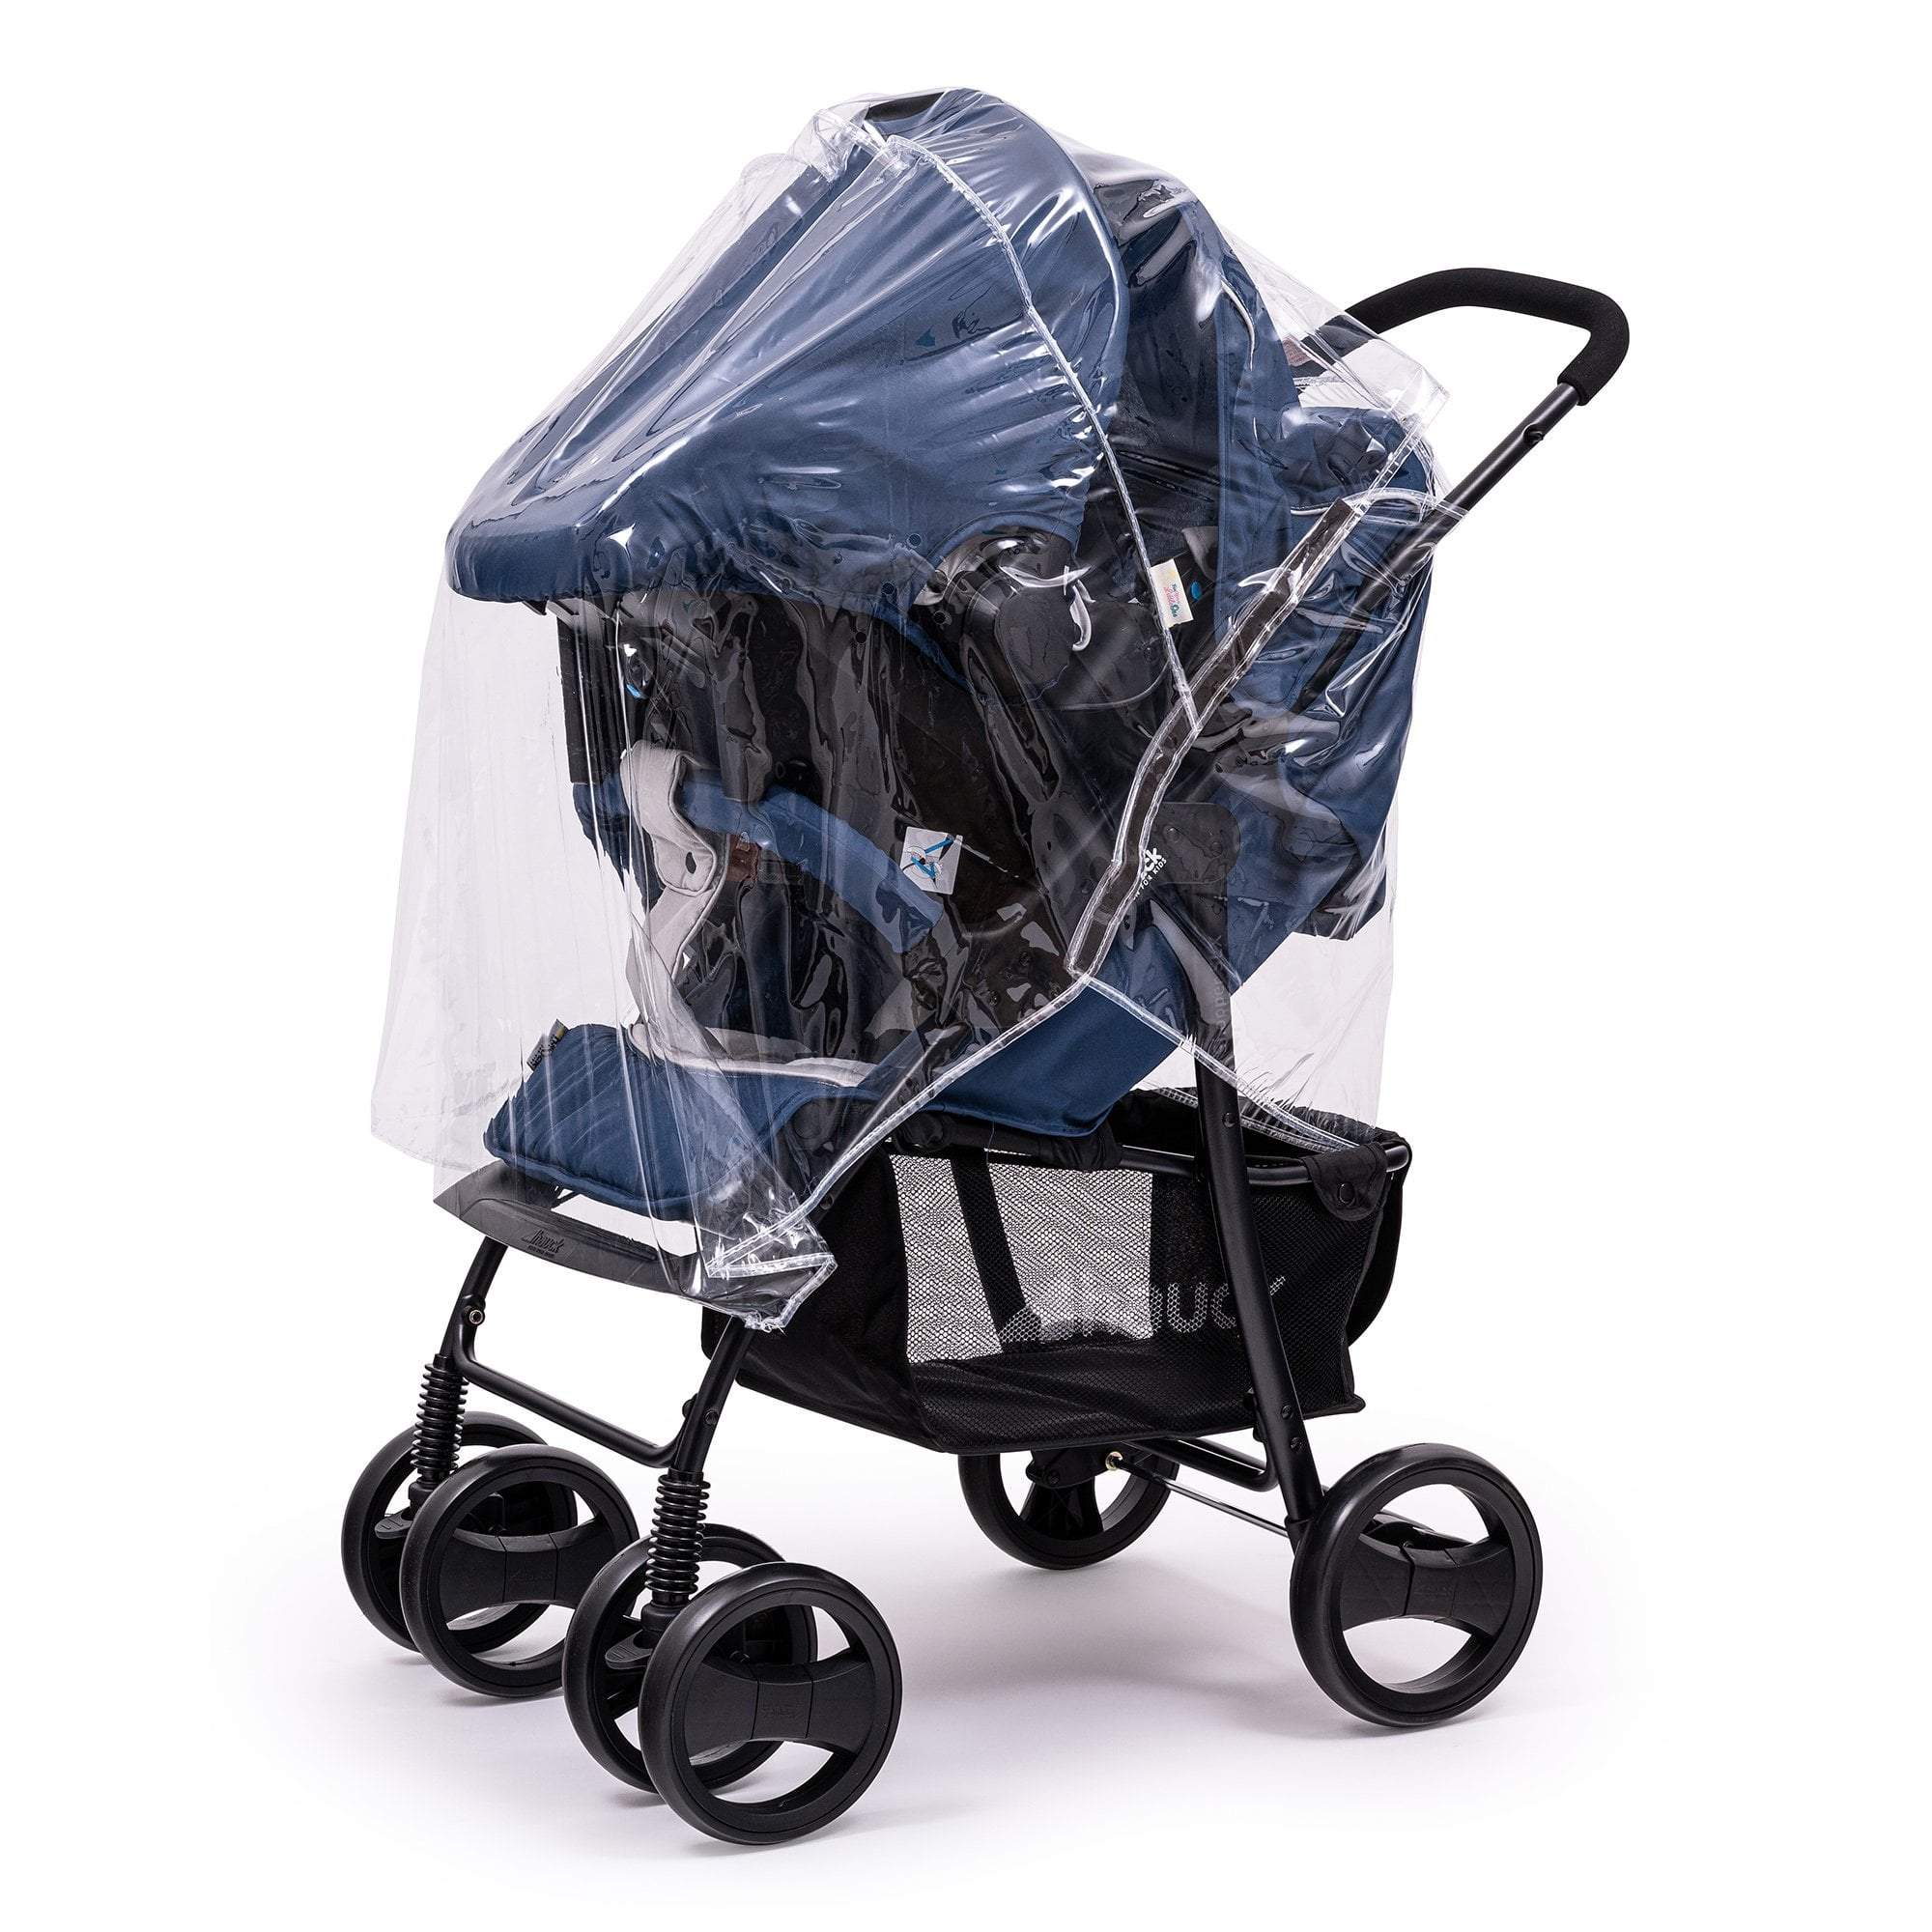 Travel System Raincover Compatible with Nuna - Fits All Models - For Your Little One